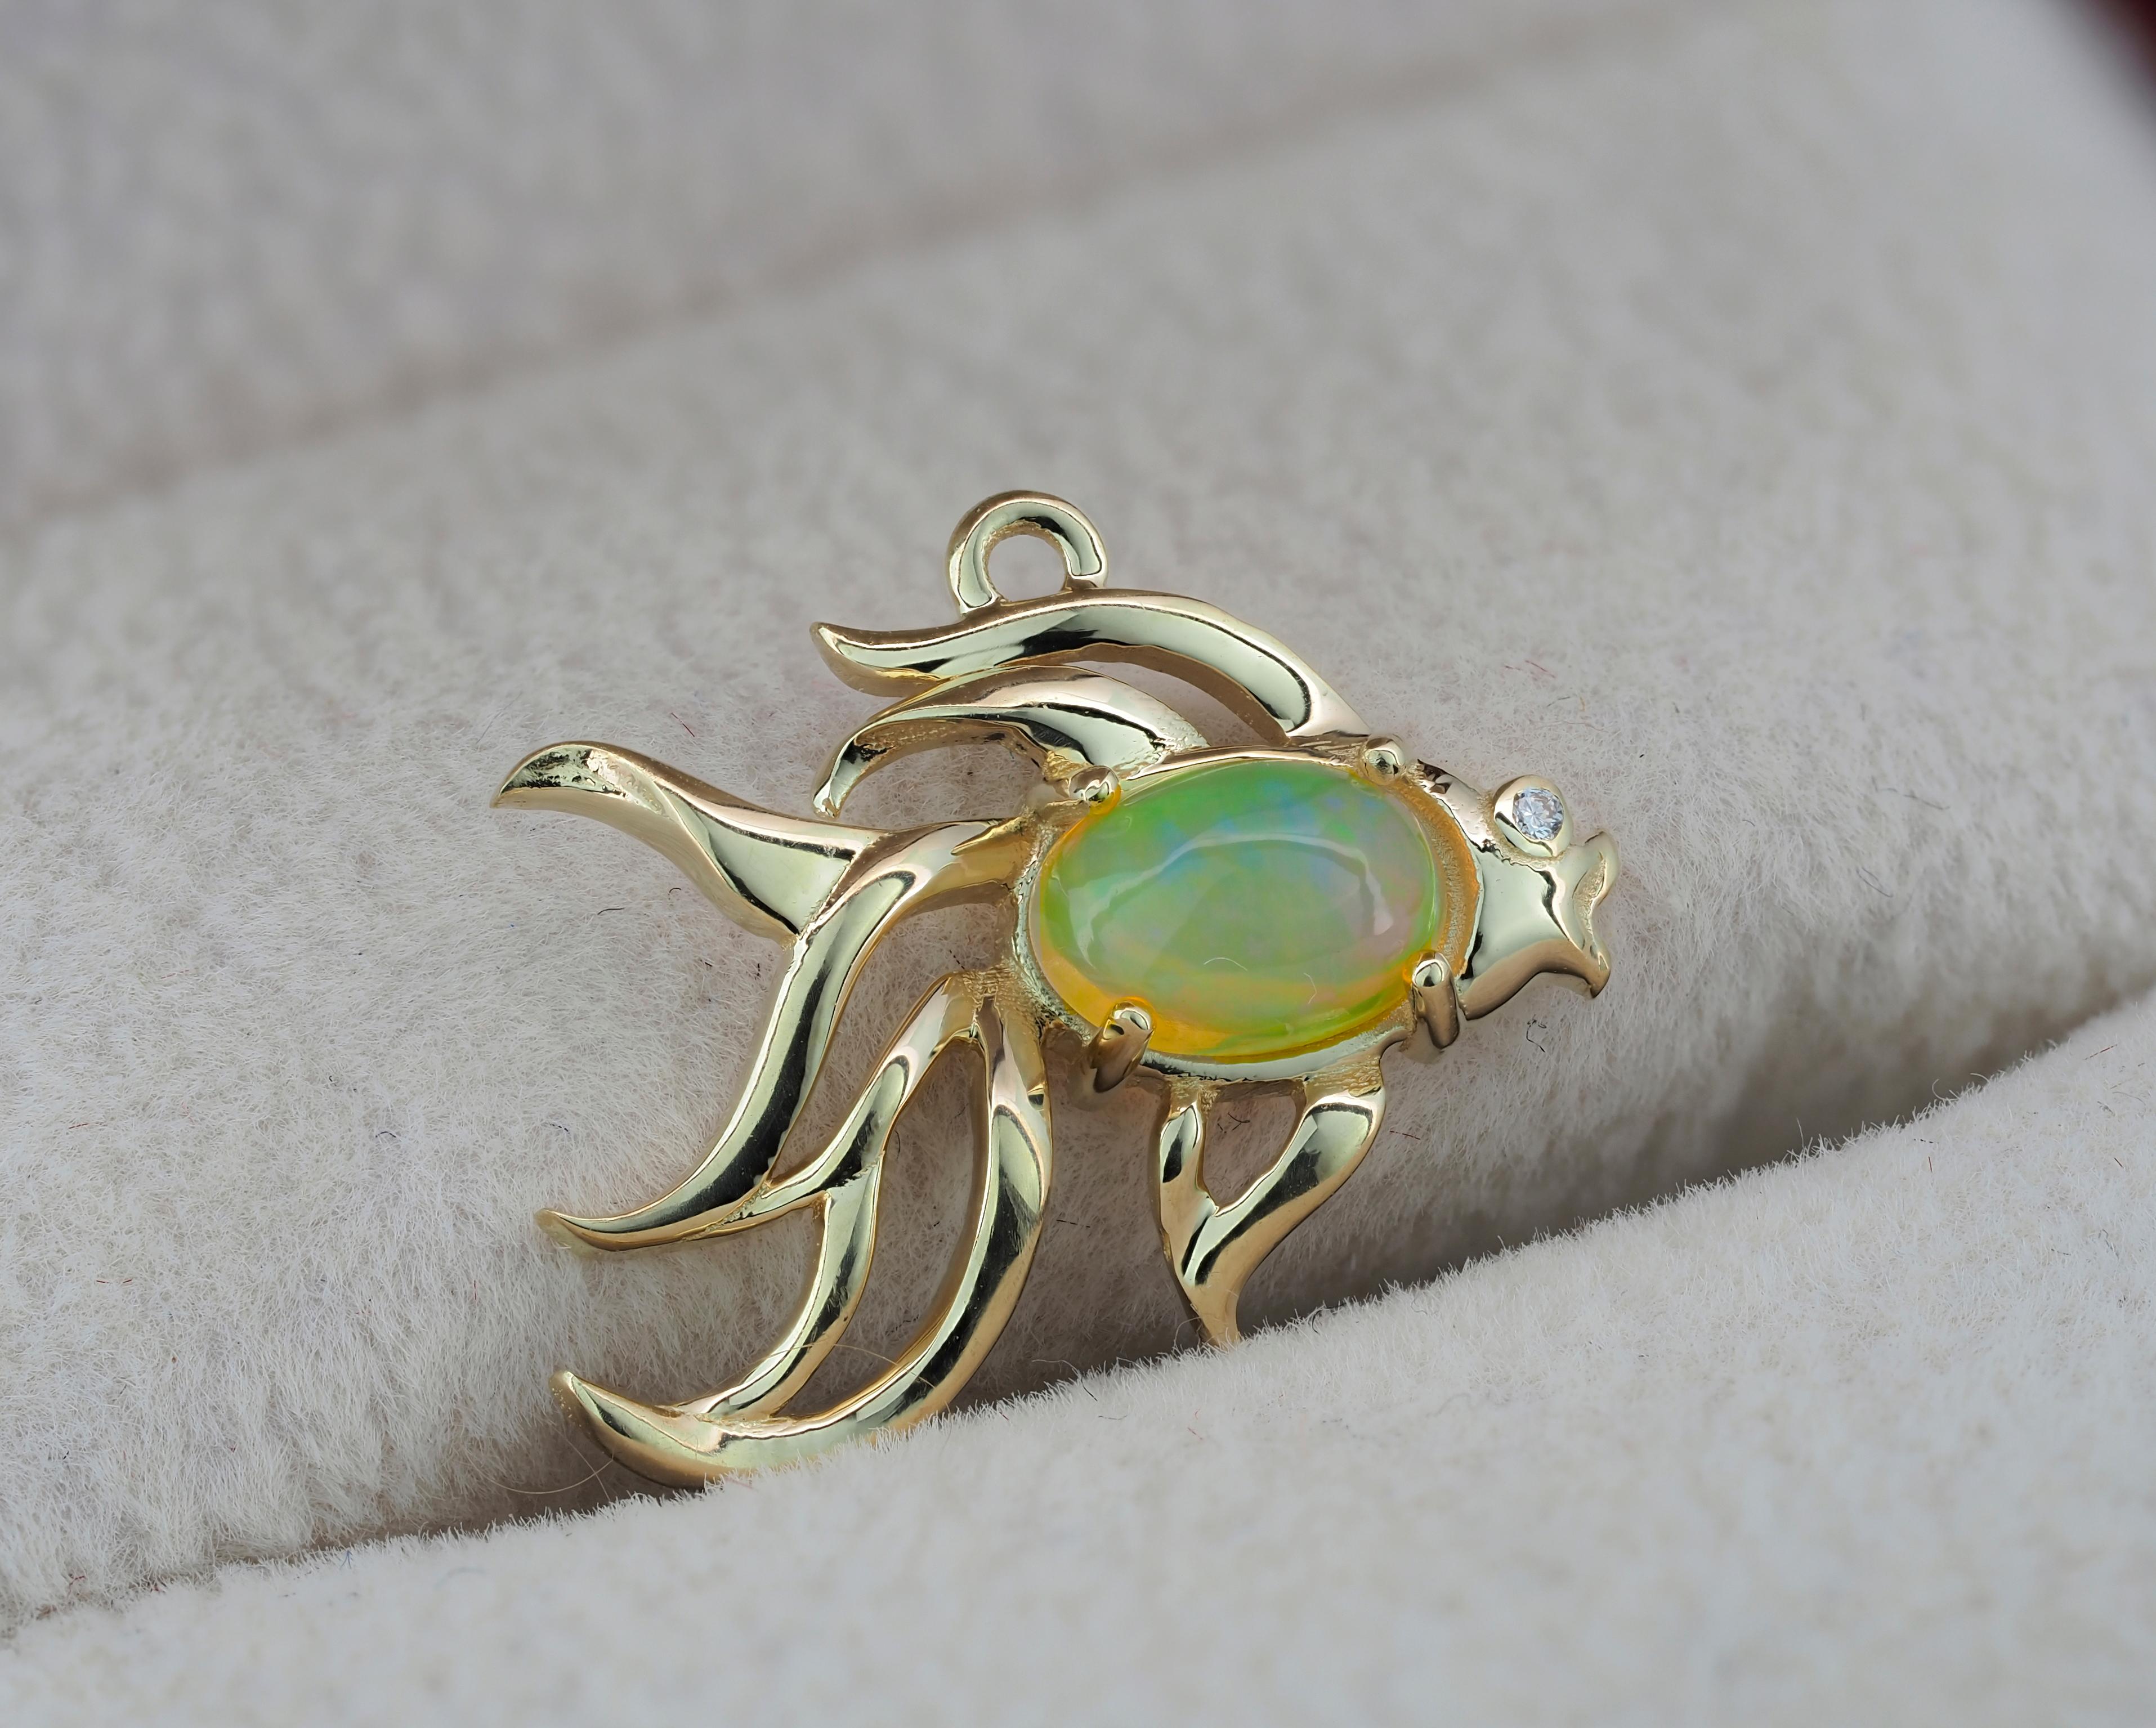 Fish design 14 kt solid gold pendant with natural opal and diamond. October birthstone.
Size: 18 x 16 mm.
Weight: 1.3 g.
Set with opal: color - multi color
Oval cabochon cut, 0.80 ct in total, 6 x 4 mm.
Clarity: Transparent
Surrounding